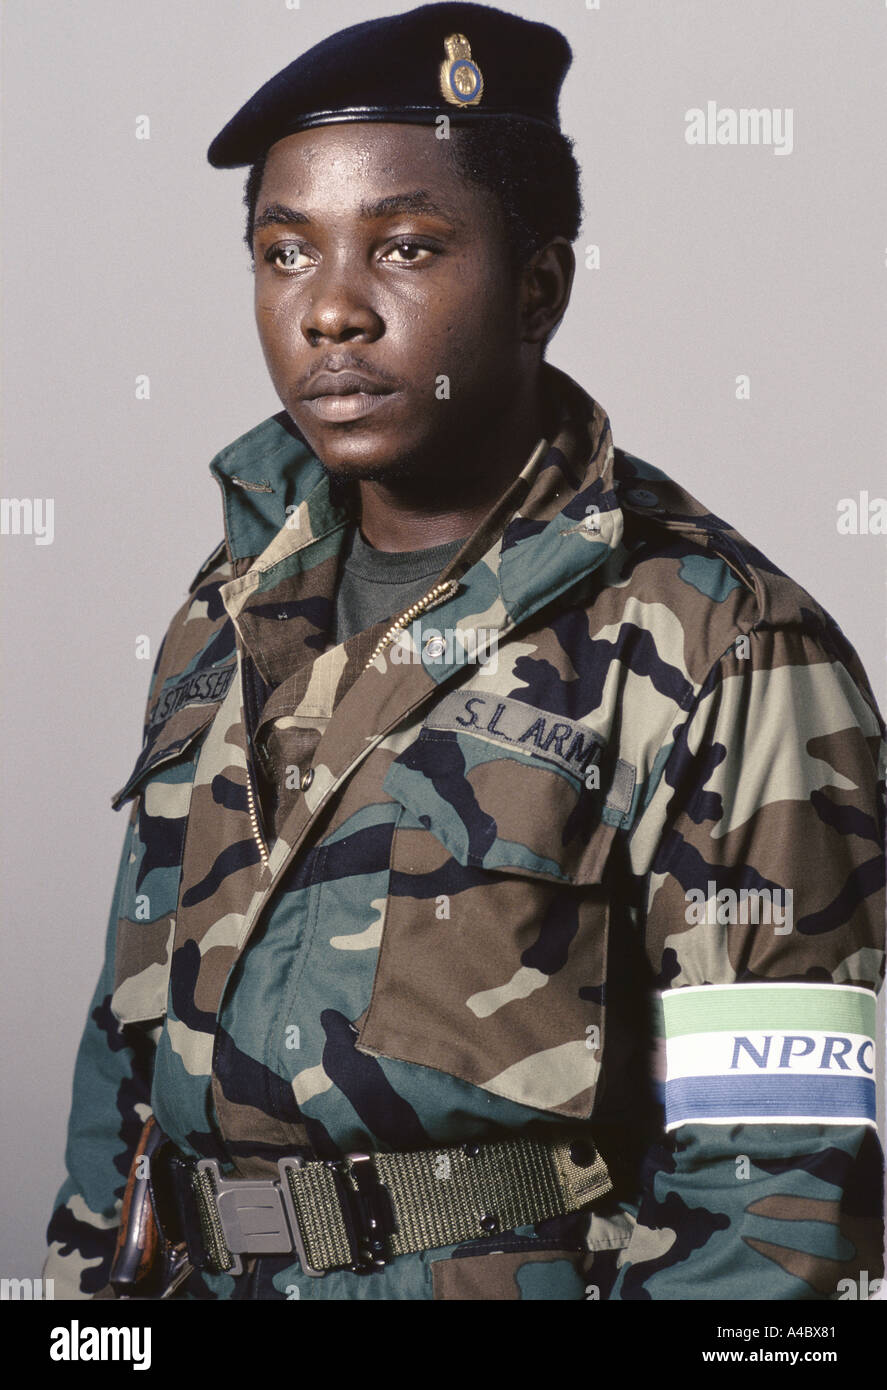 Captain Valentine Strasser, 27, Leader of the Provisional Ruling Council,  (NPRC) and Head of State, Sierra Leone, July 1992 Stock Photo - Alamy